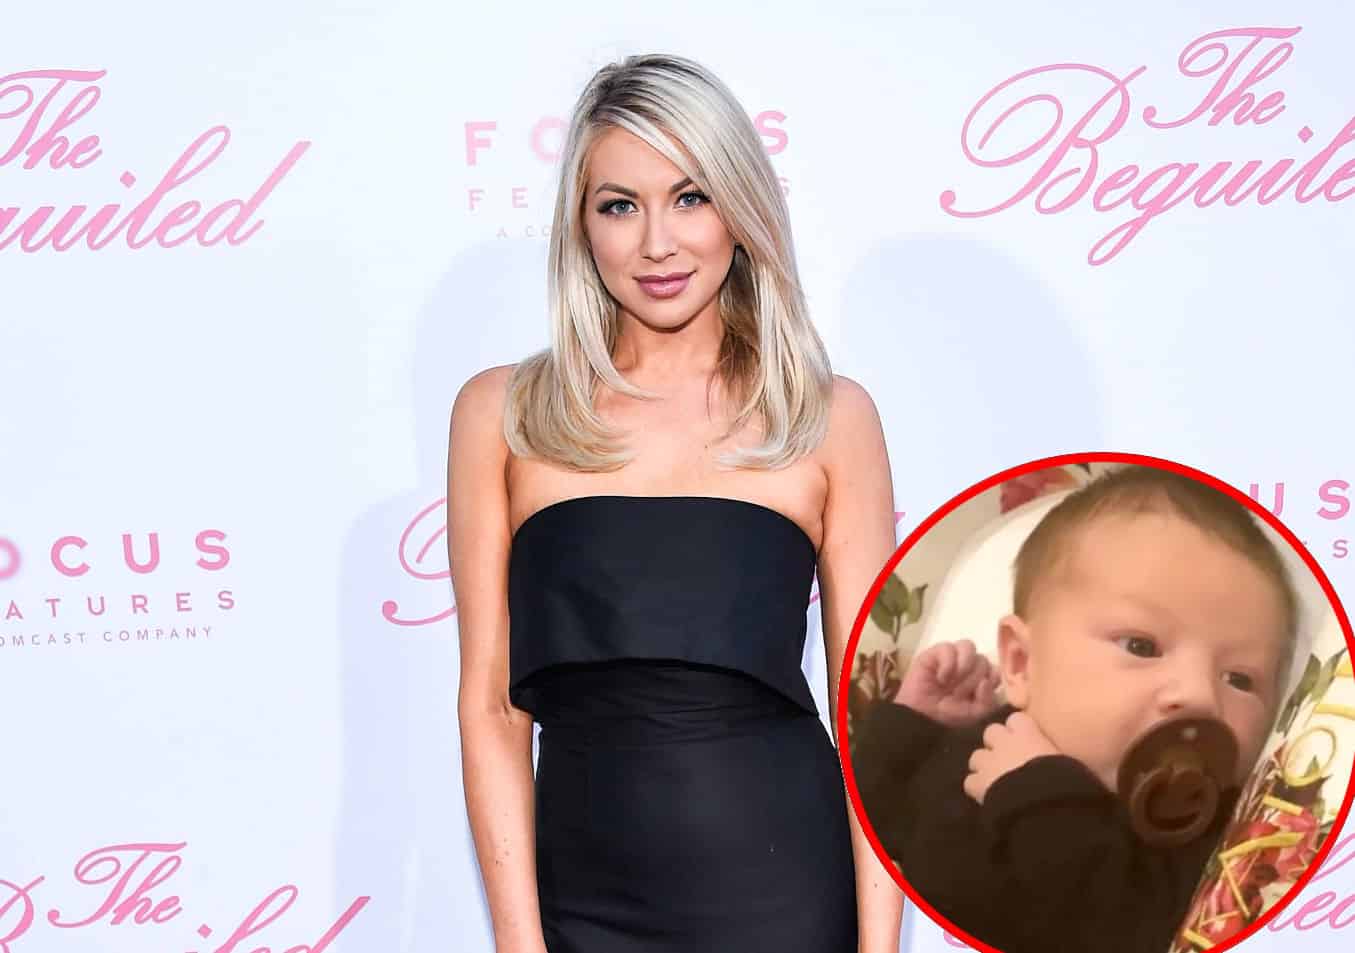 PHOTOS: Stassi Schroeder Shares New Pics of Daughter Hartford, See the Baby Girl Lounging on a Pillow as Her Godmother is Named and the 'Vanderpump Rules' Cast Reacts